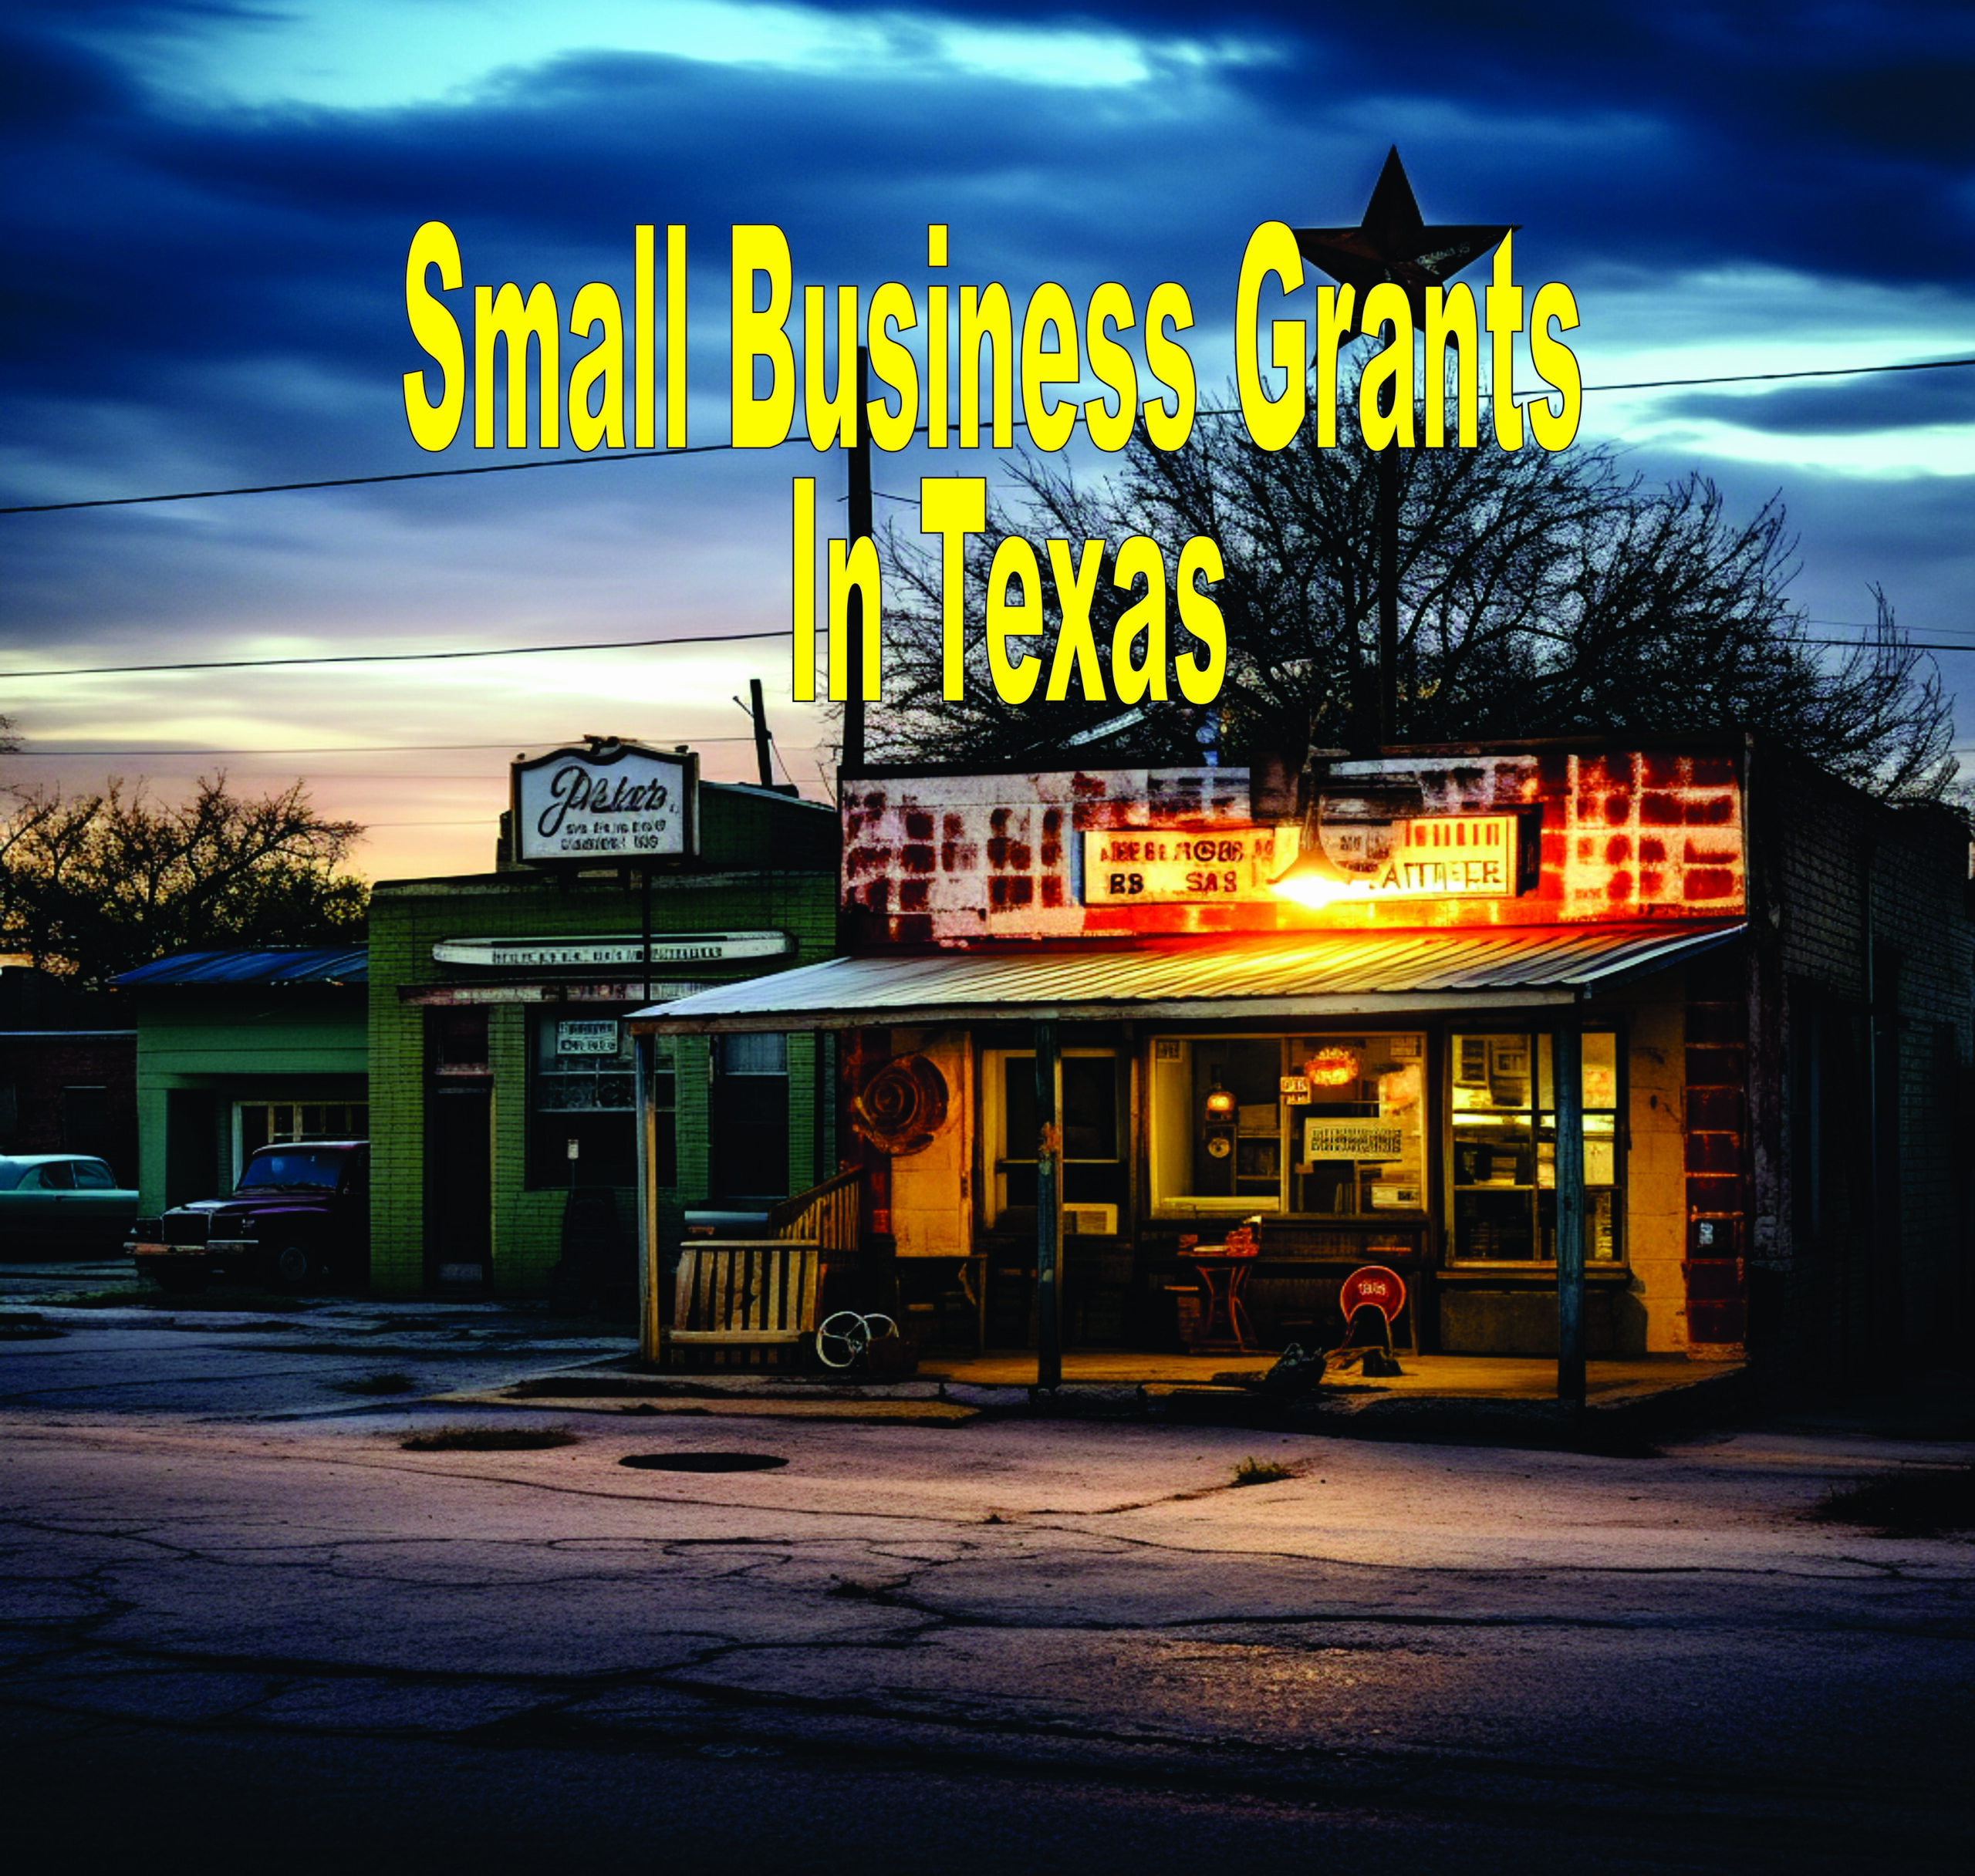 Small Business Grants In Texas